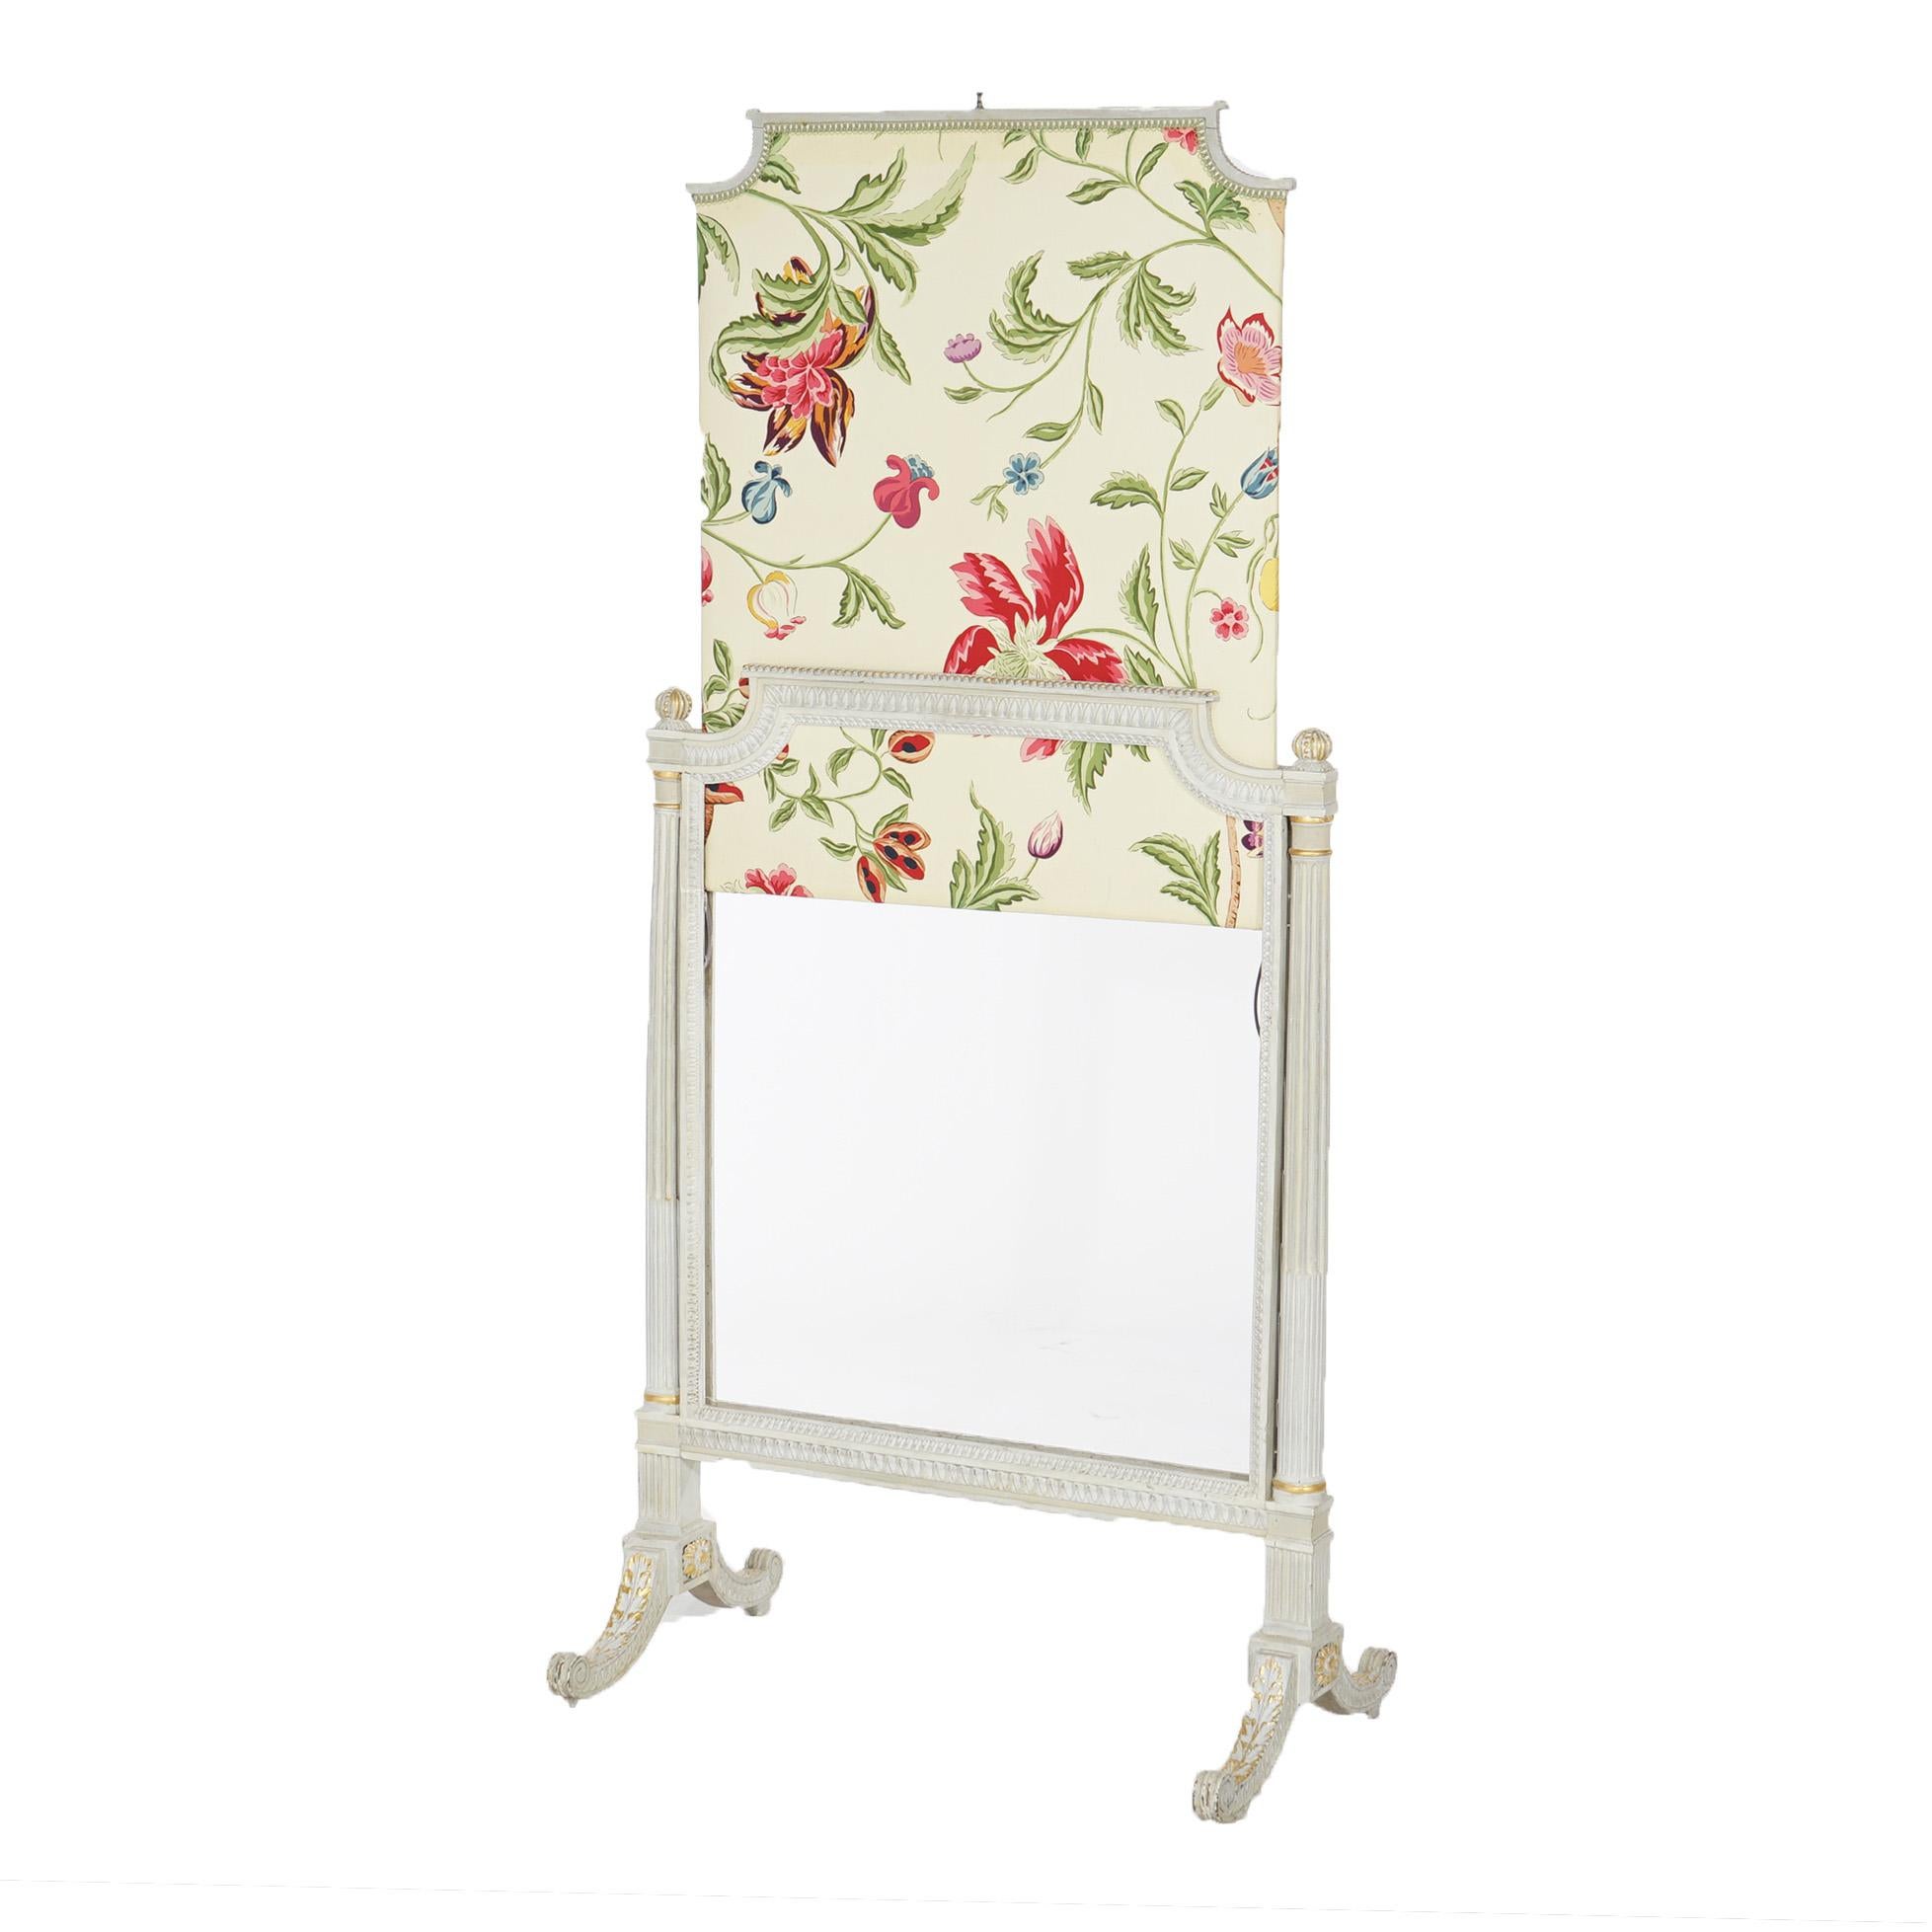 French Louis XVI Style White & Gilt Fire Screen with Floral Fabric, 20th C For Sale 3